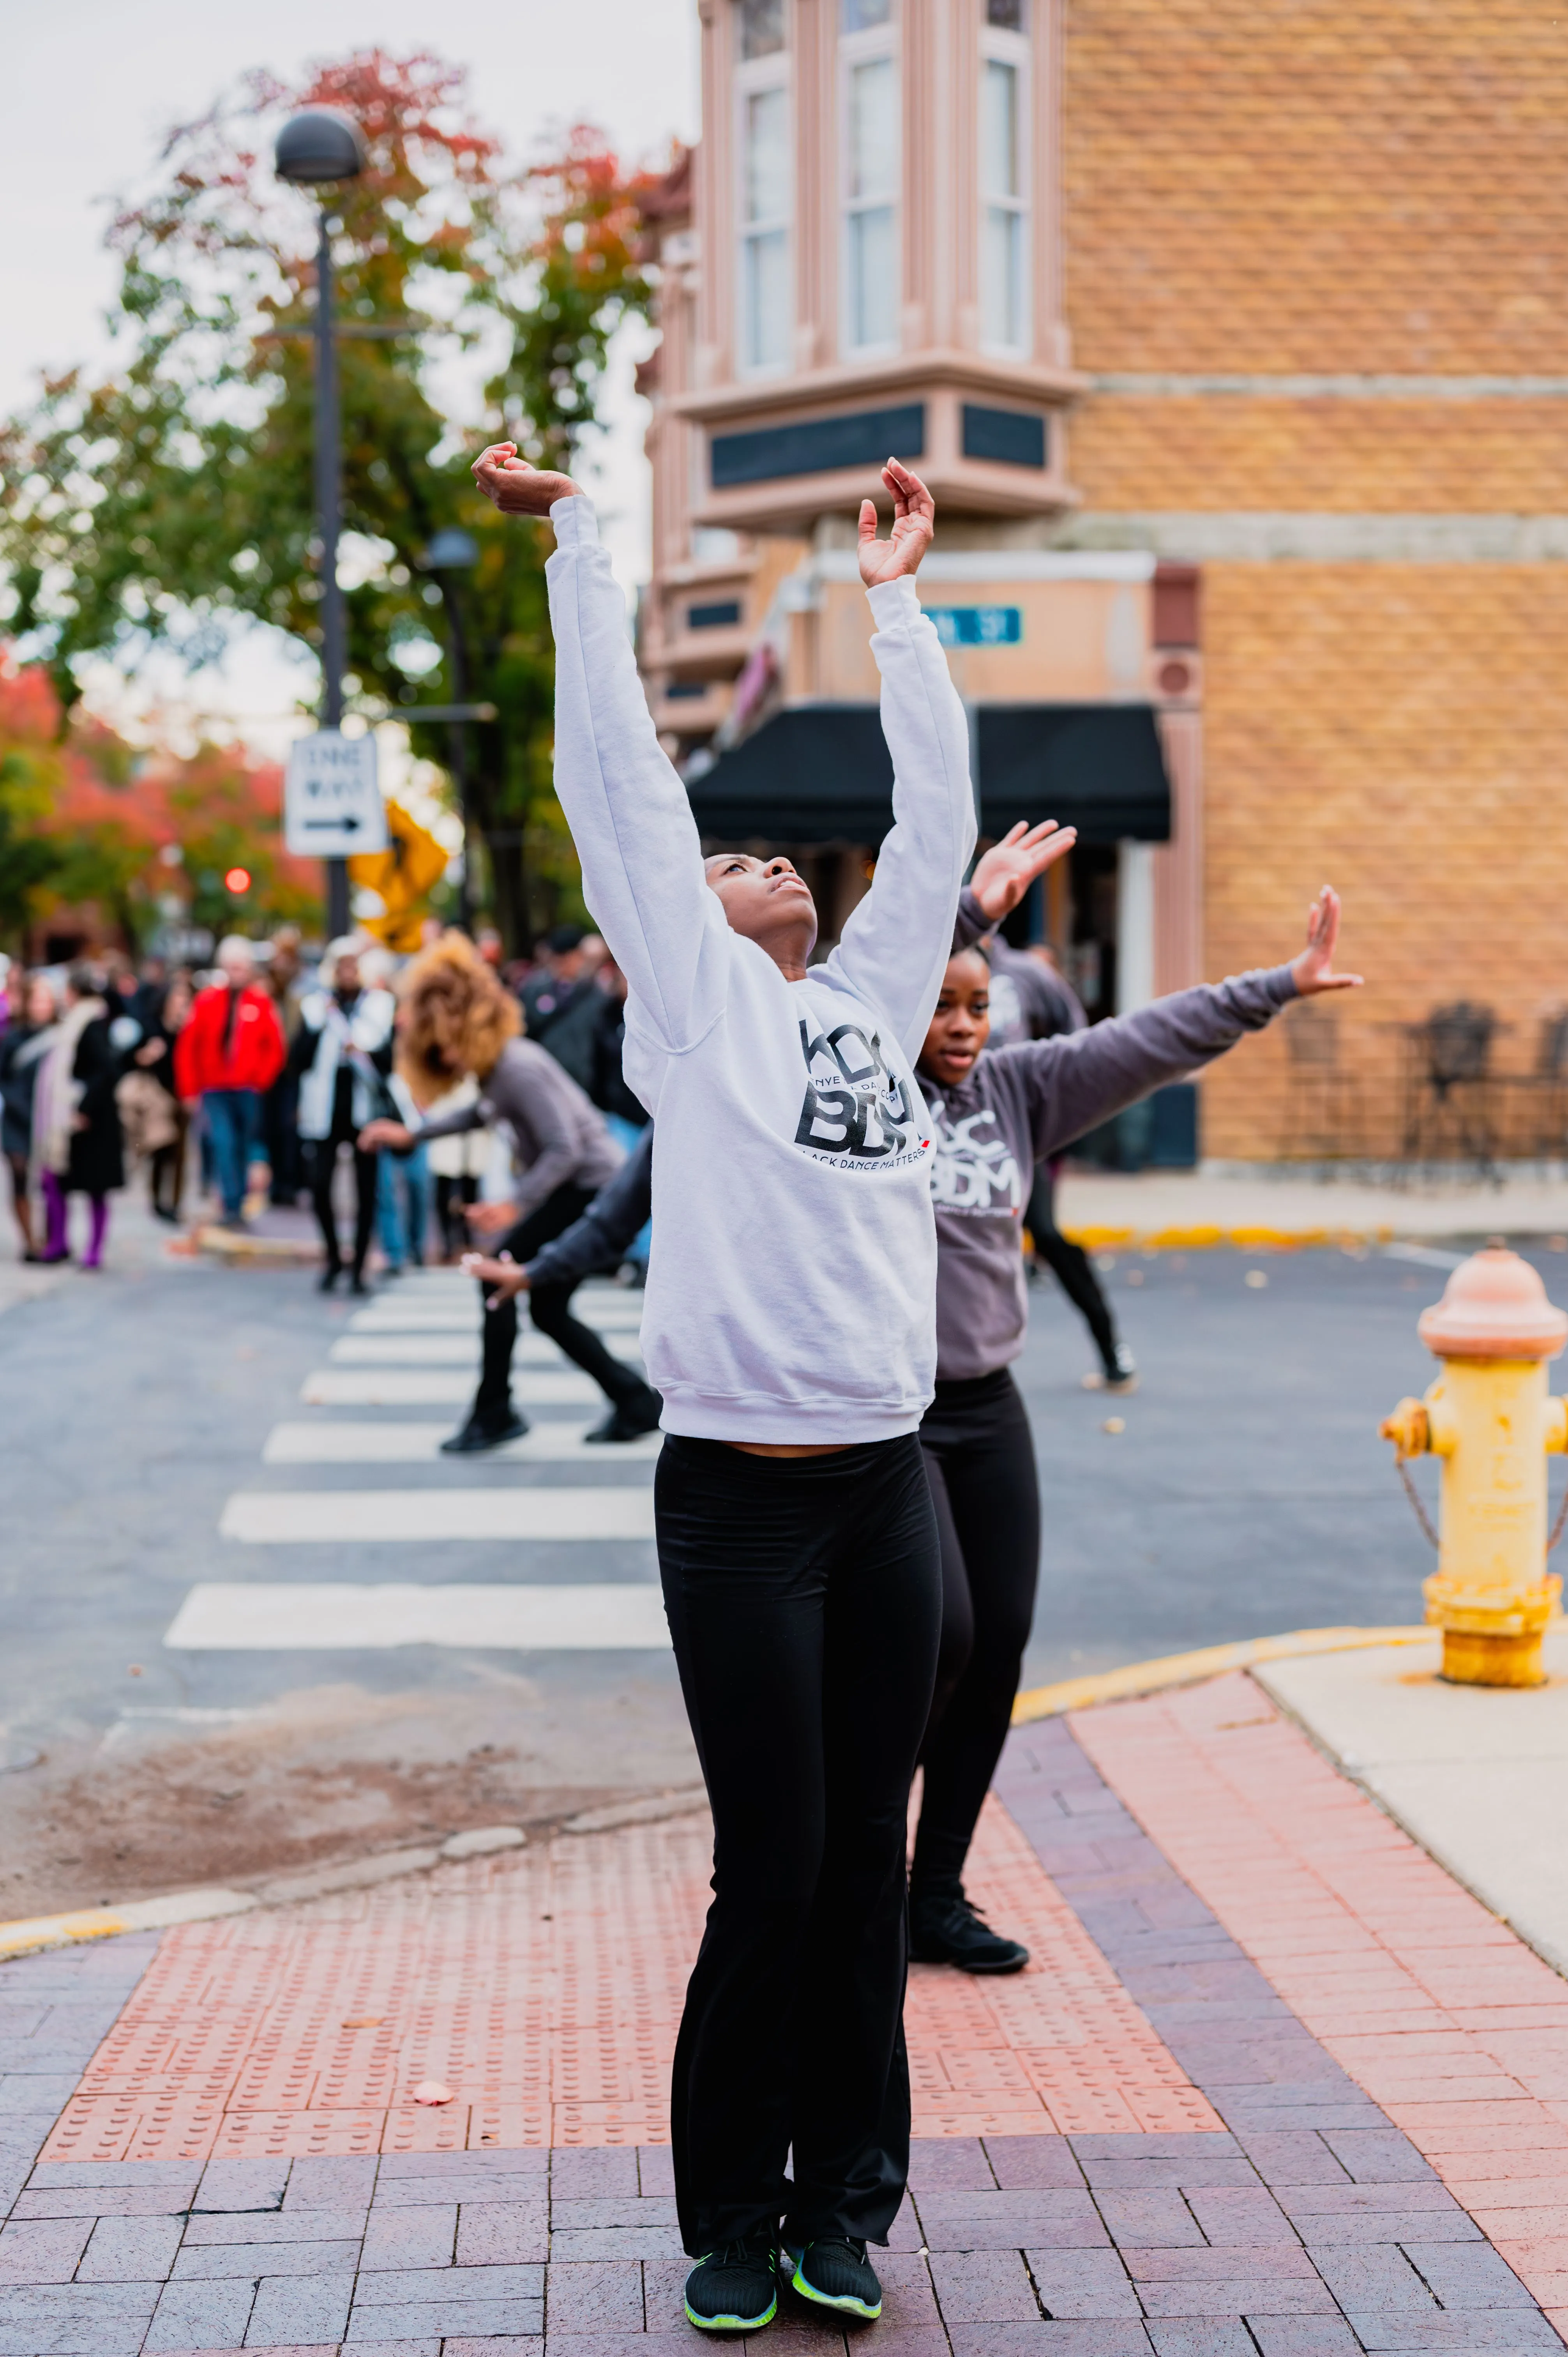 Person in excitement raising arms on a city street with other pedestrians in the background.